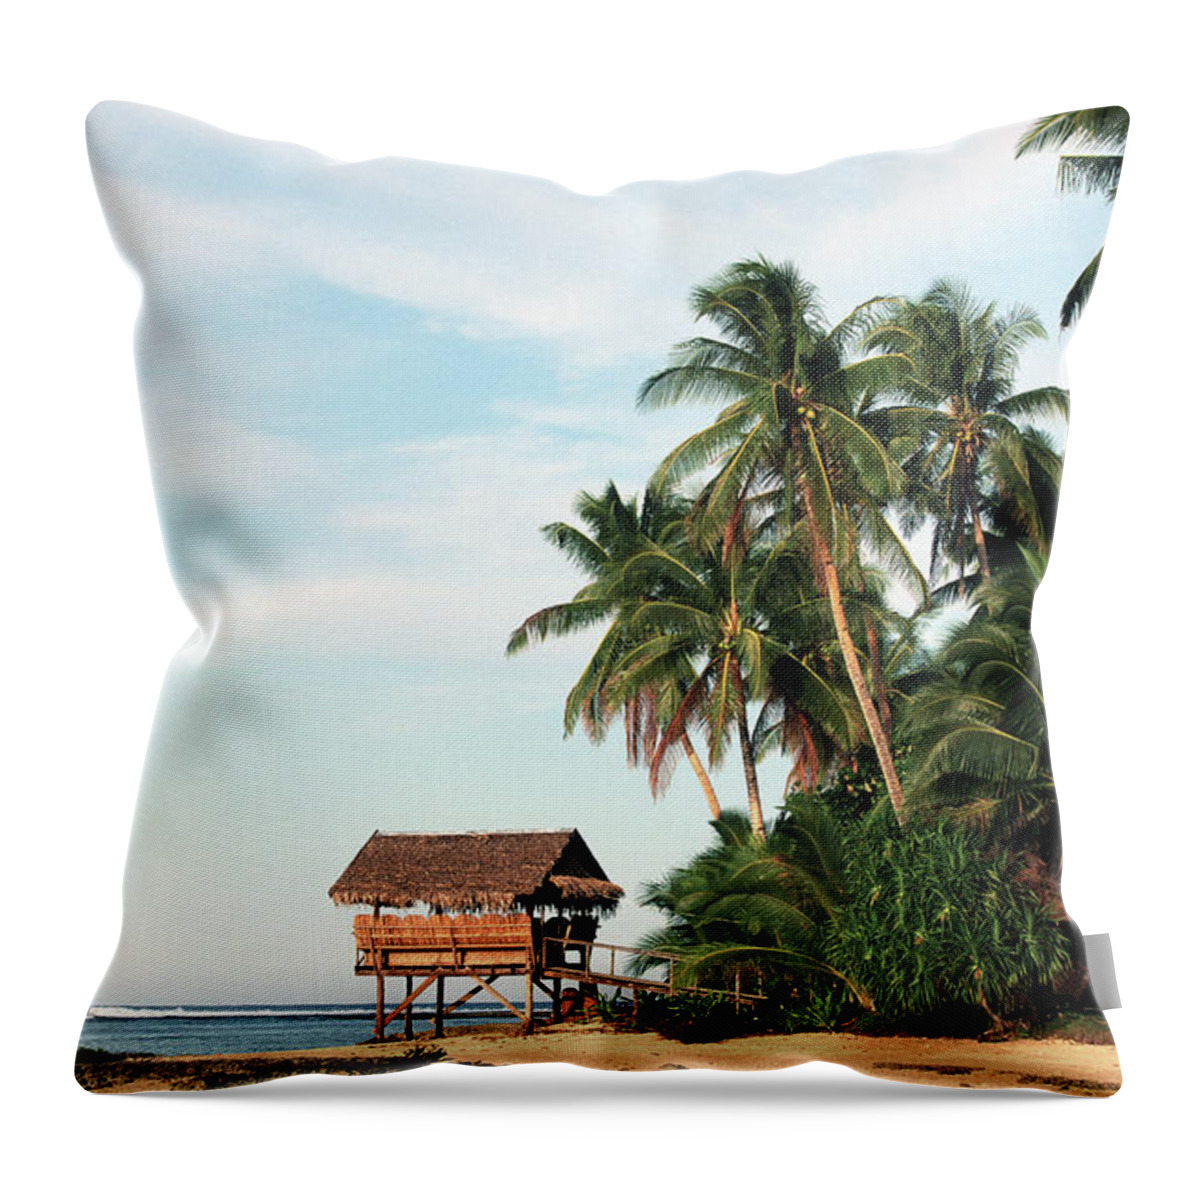 Tropical Tree Throw Pillow featuring the photograph Philippines, Surigao Del Norte, Siargao by Tropicalpixsingapore